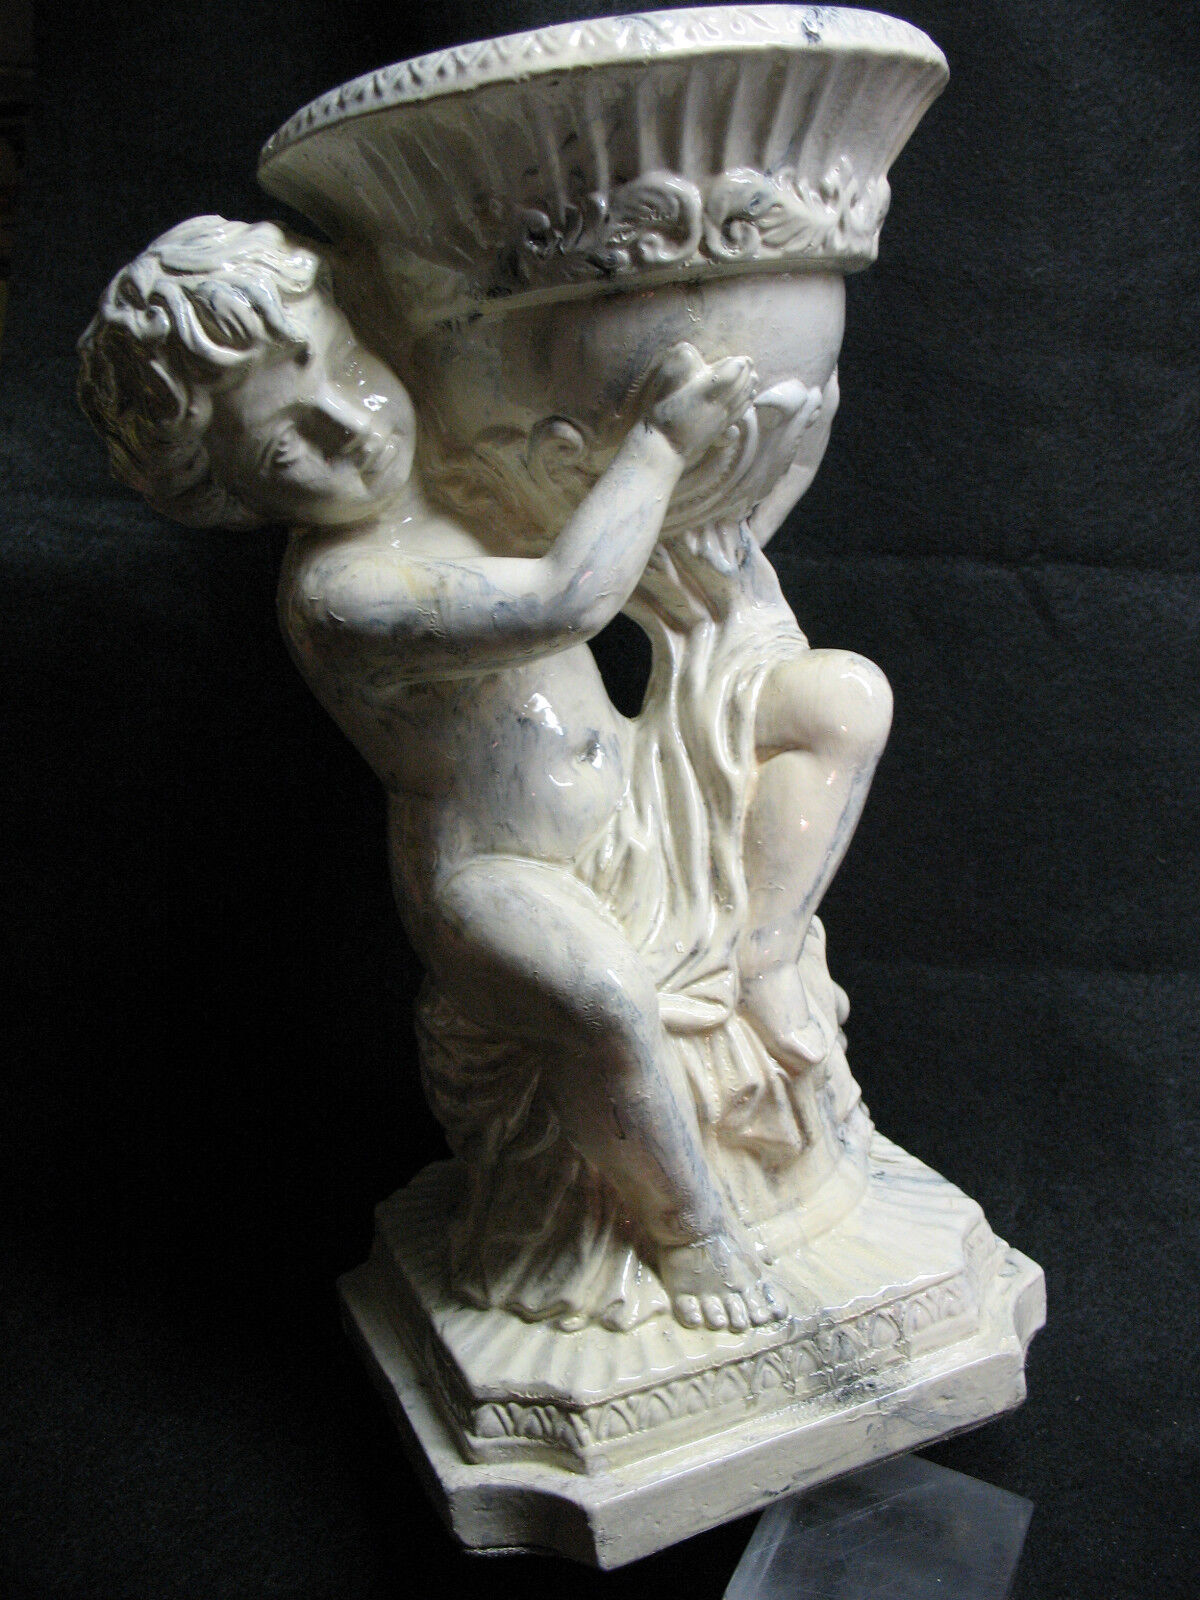 CHERUB VASE  FAUX MARBLE  STATUE PLANTER - 13 \'\' TALL   APPROX  7 .5 LBS NICE